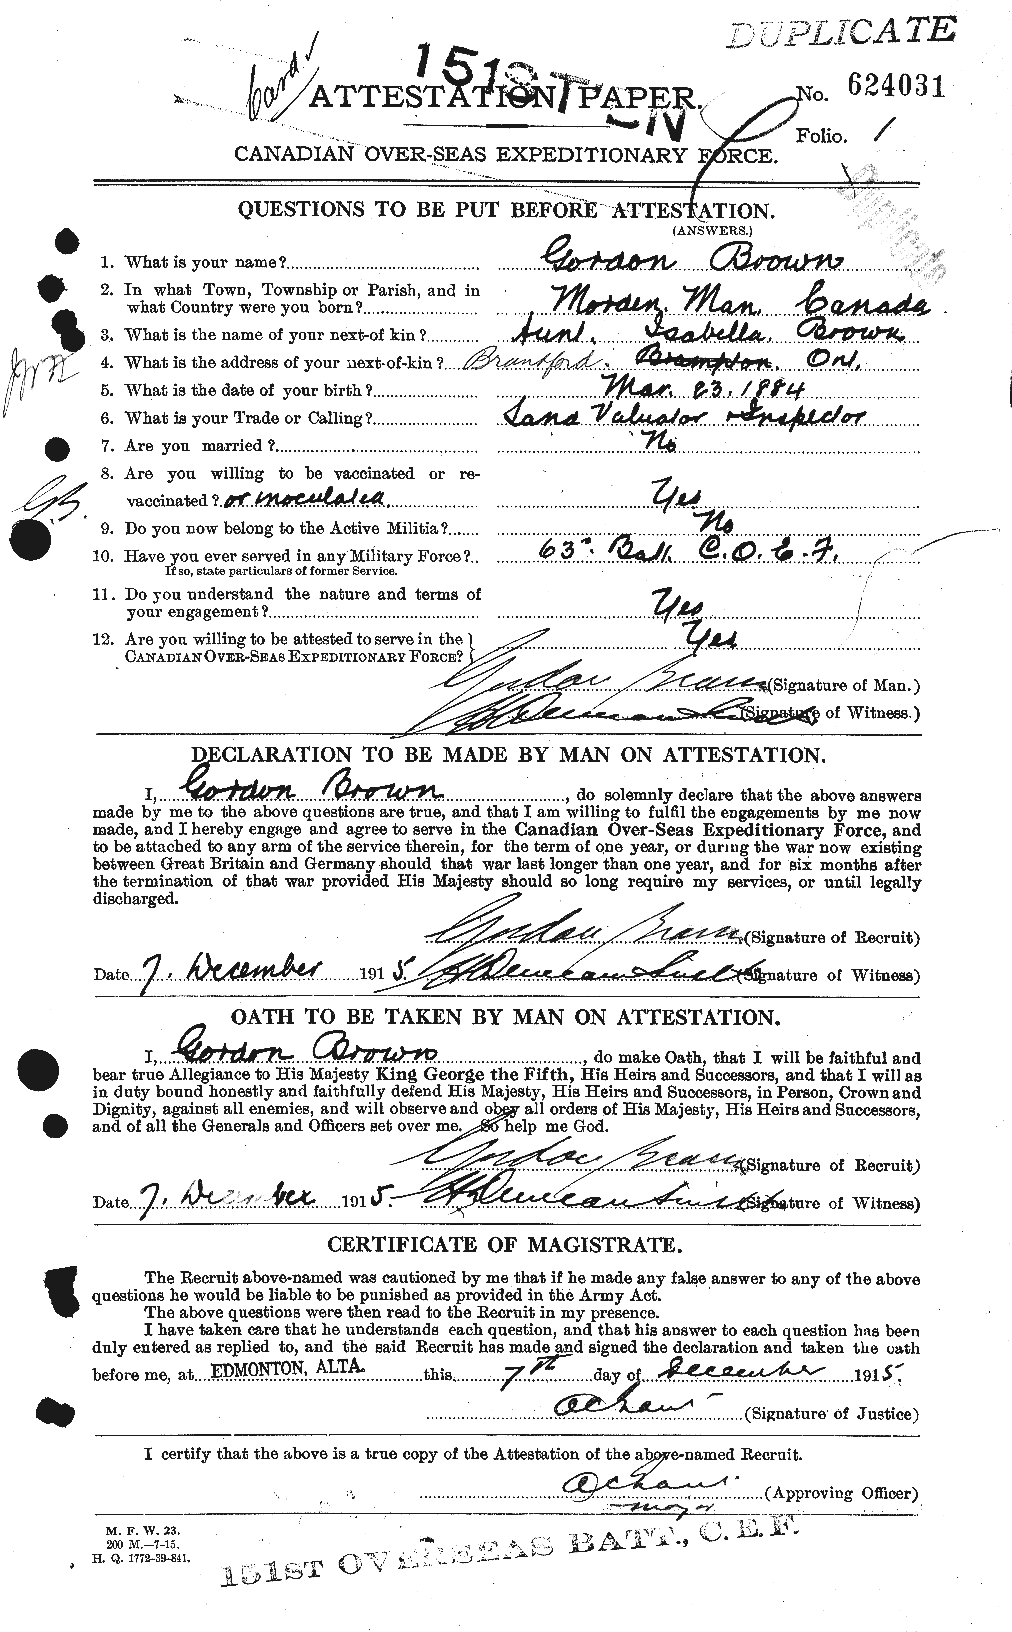 Personnel Records of the First World War - CEF 262623a